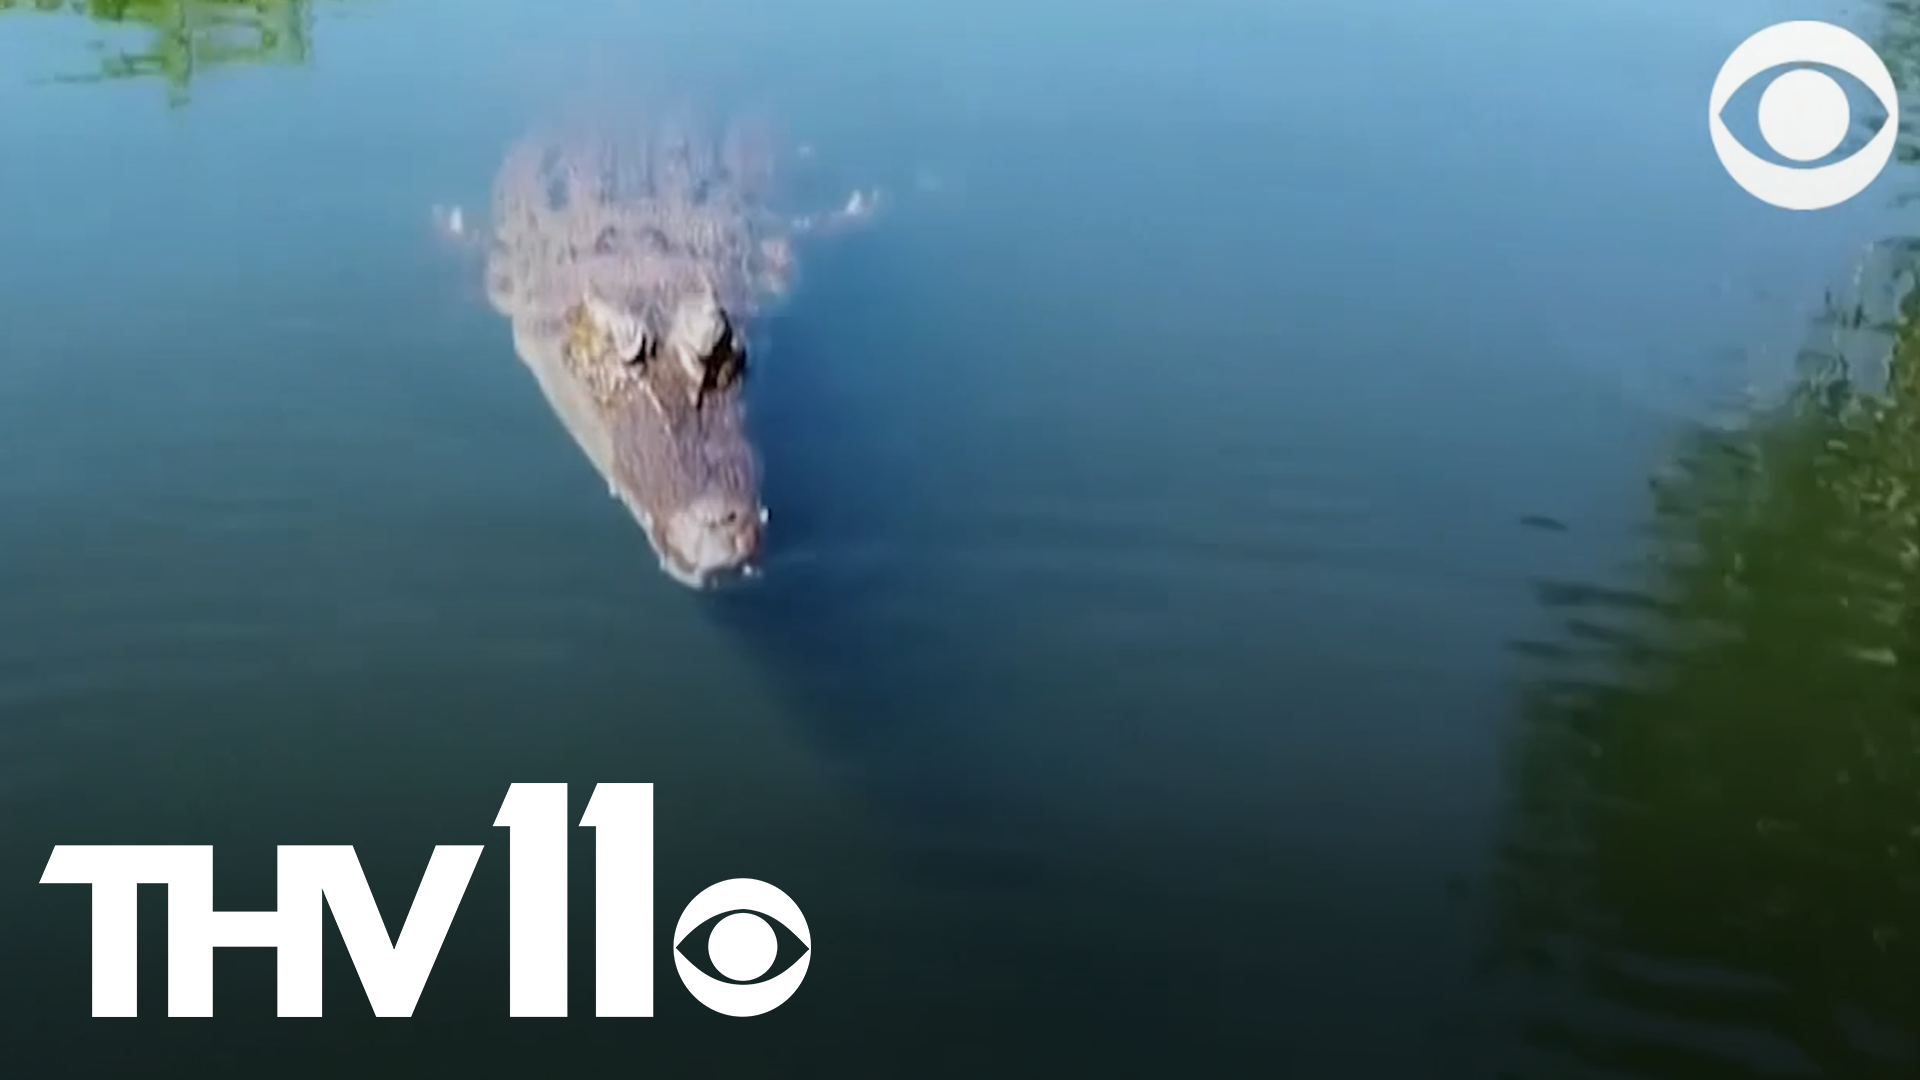 A drone captured the moment a crocodile jumped out of the water and bit the device as it was filming at the Crocodylus Park in Darwin, Australia in May.